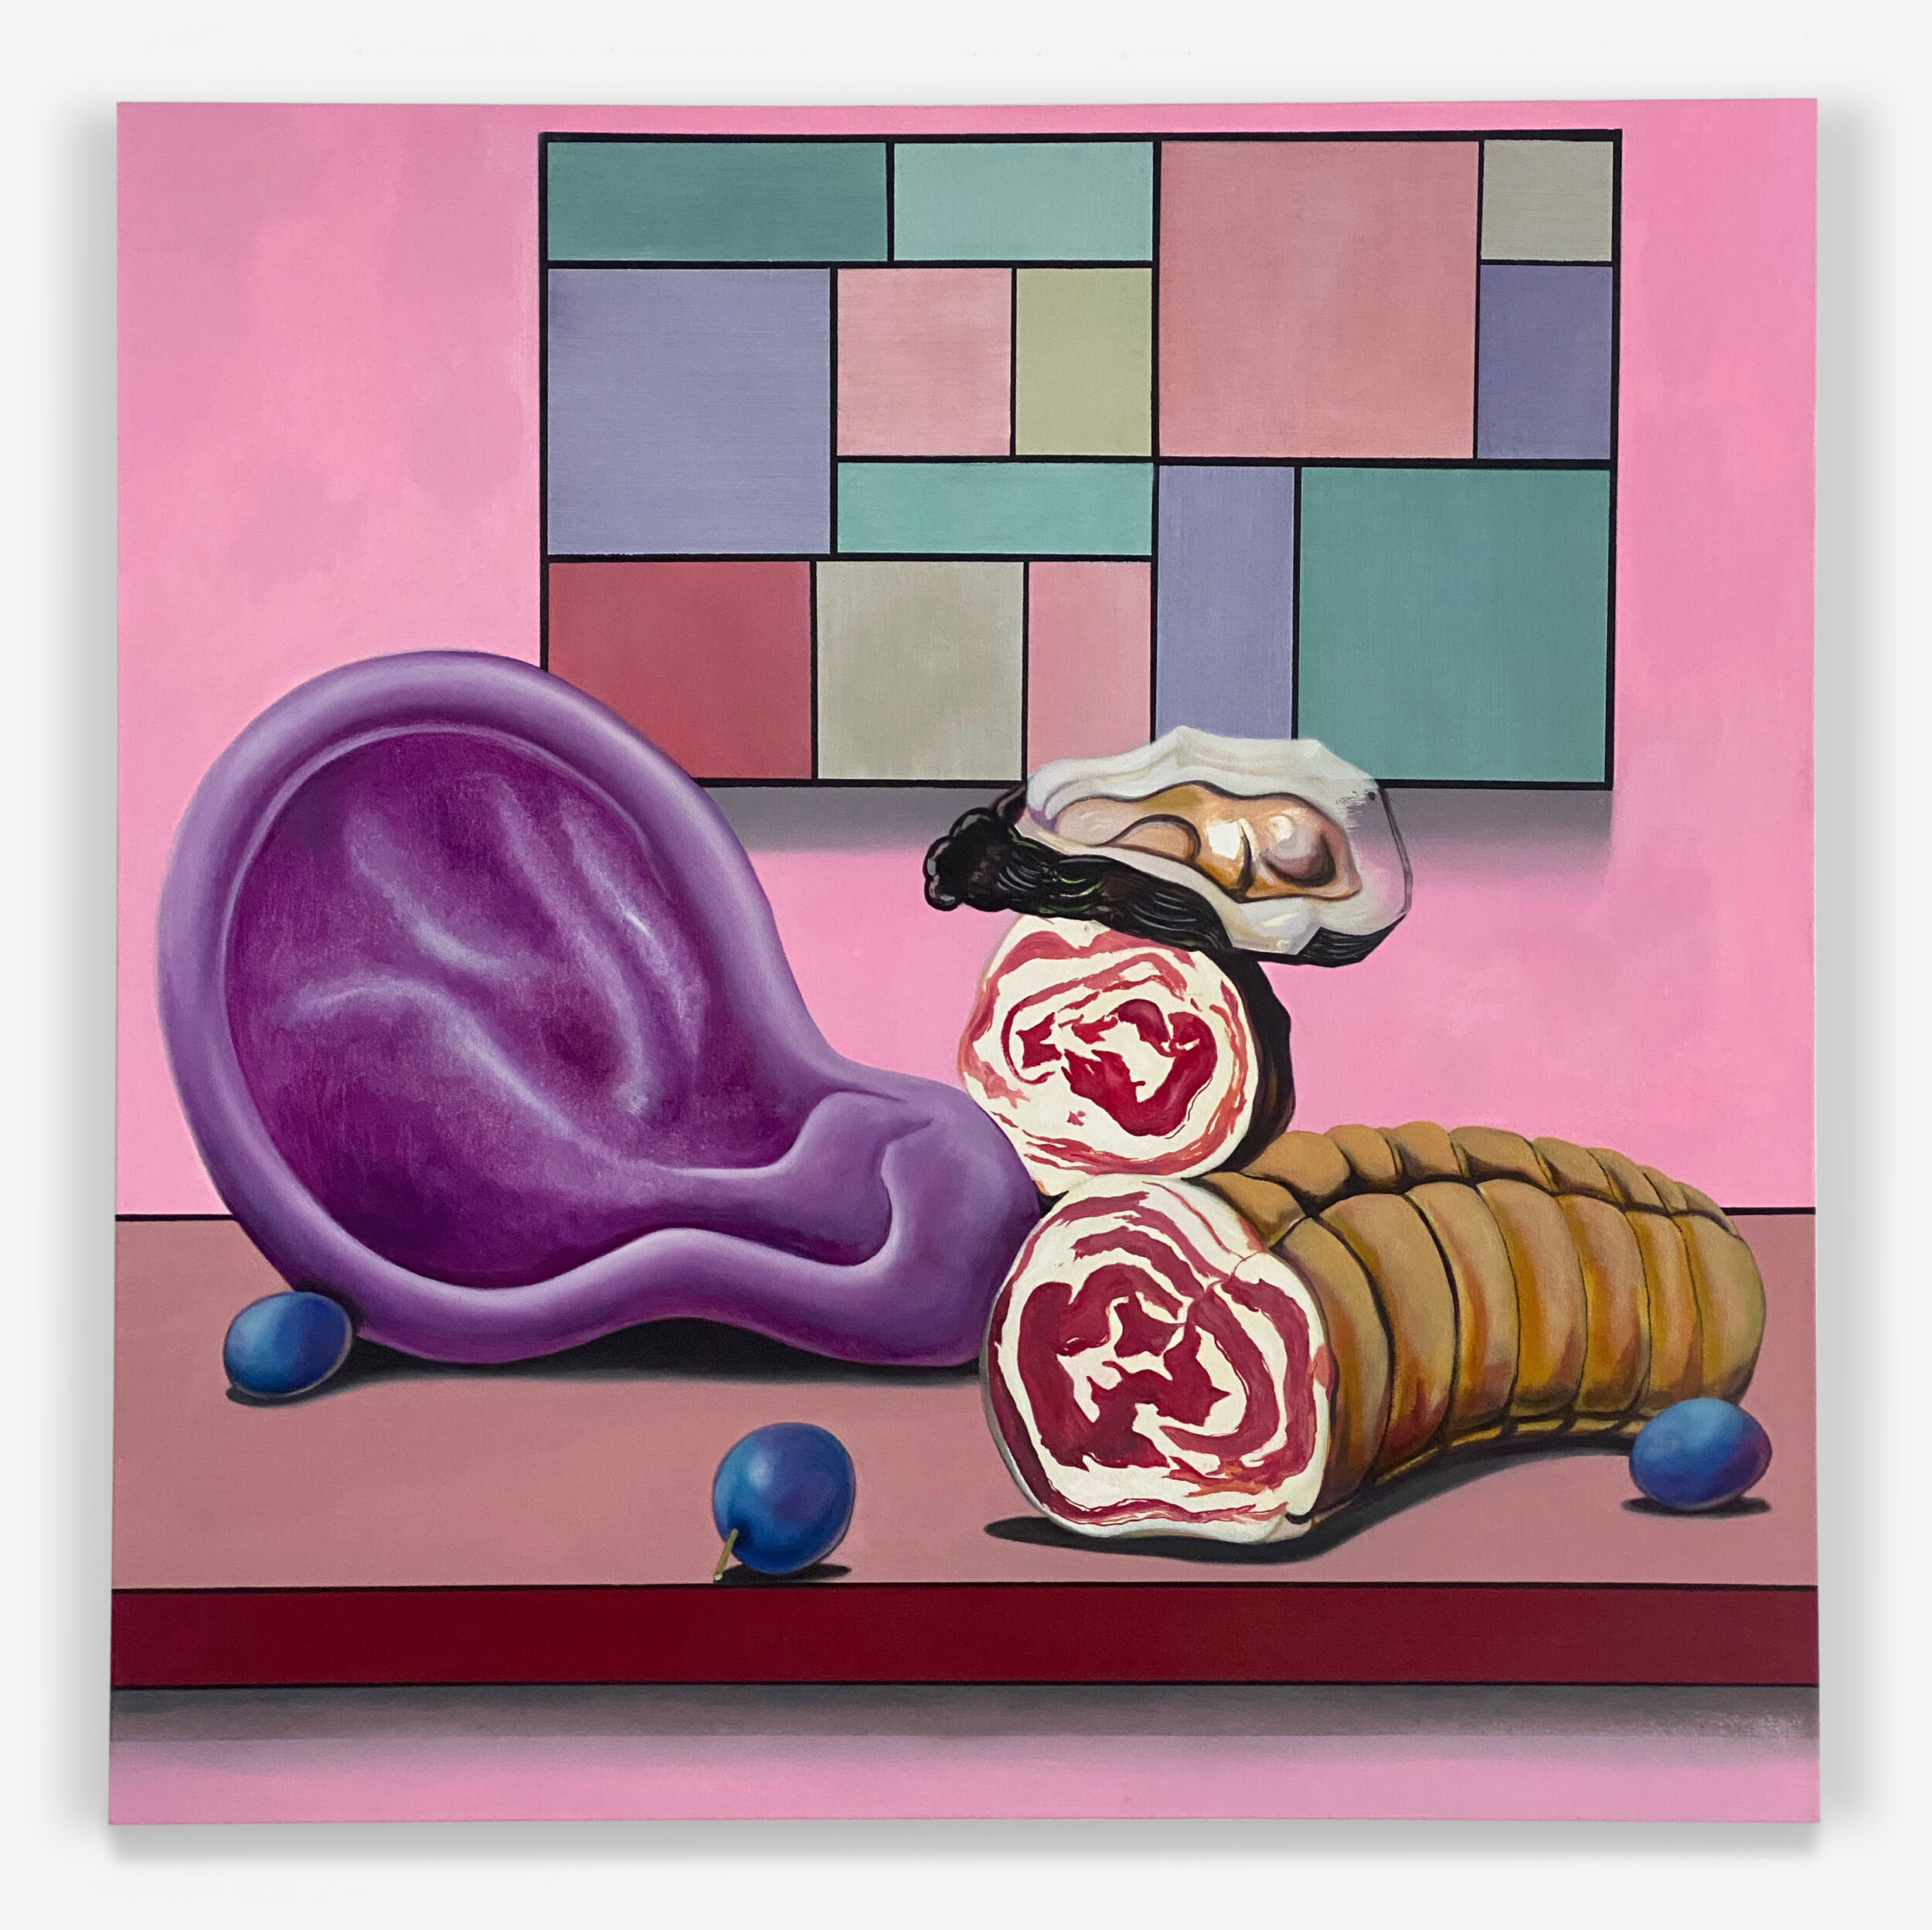    Untitled (Pancetta) , 2020   Oil on canvas  101.6 by 101.6 cm (40 by 40 in.)  From the series  L’oreille, c’est une zone érogène   (studio) 